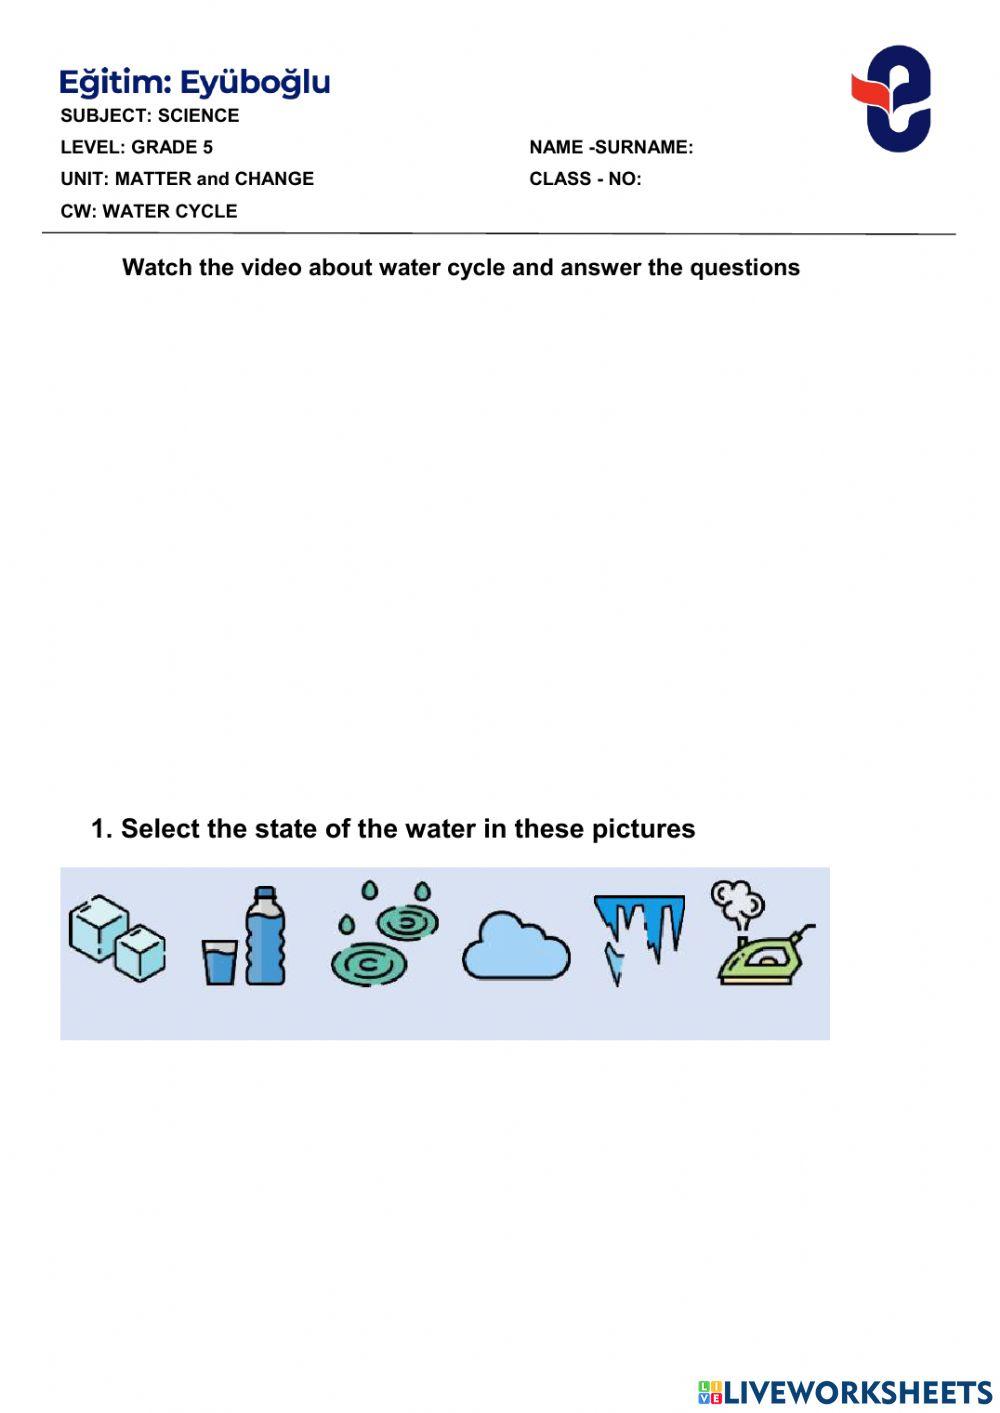 Water cycle